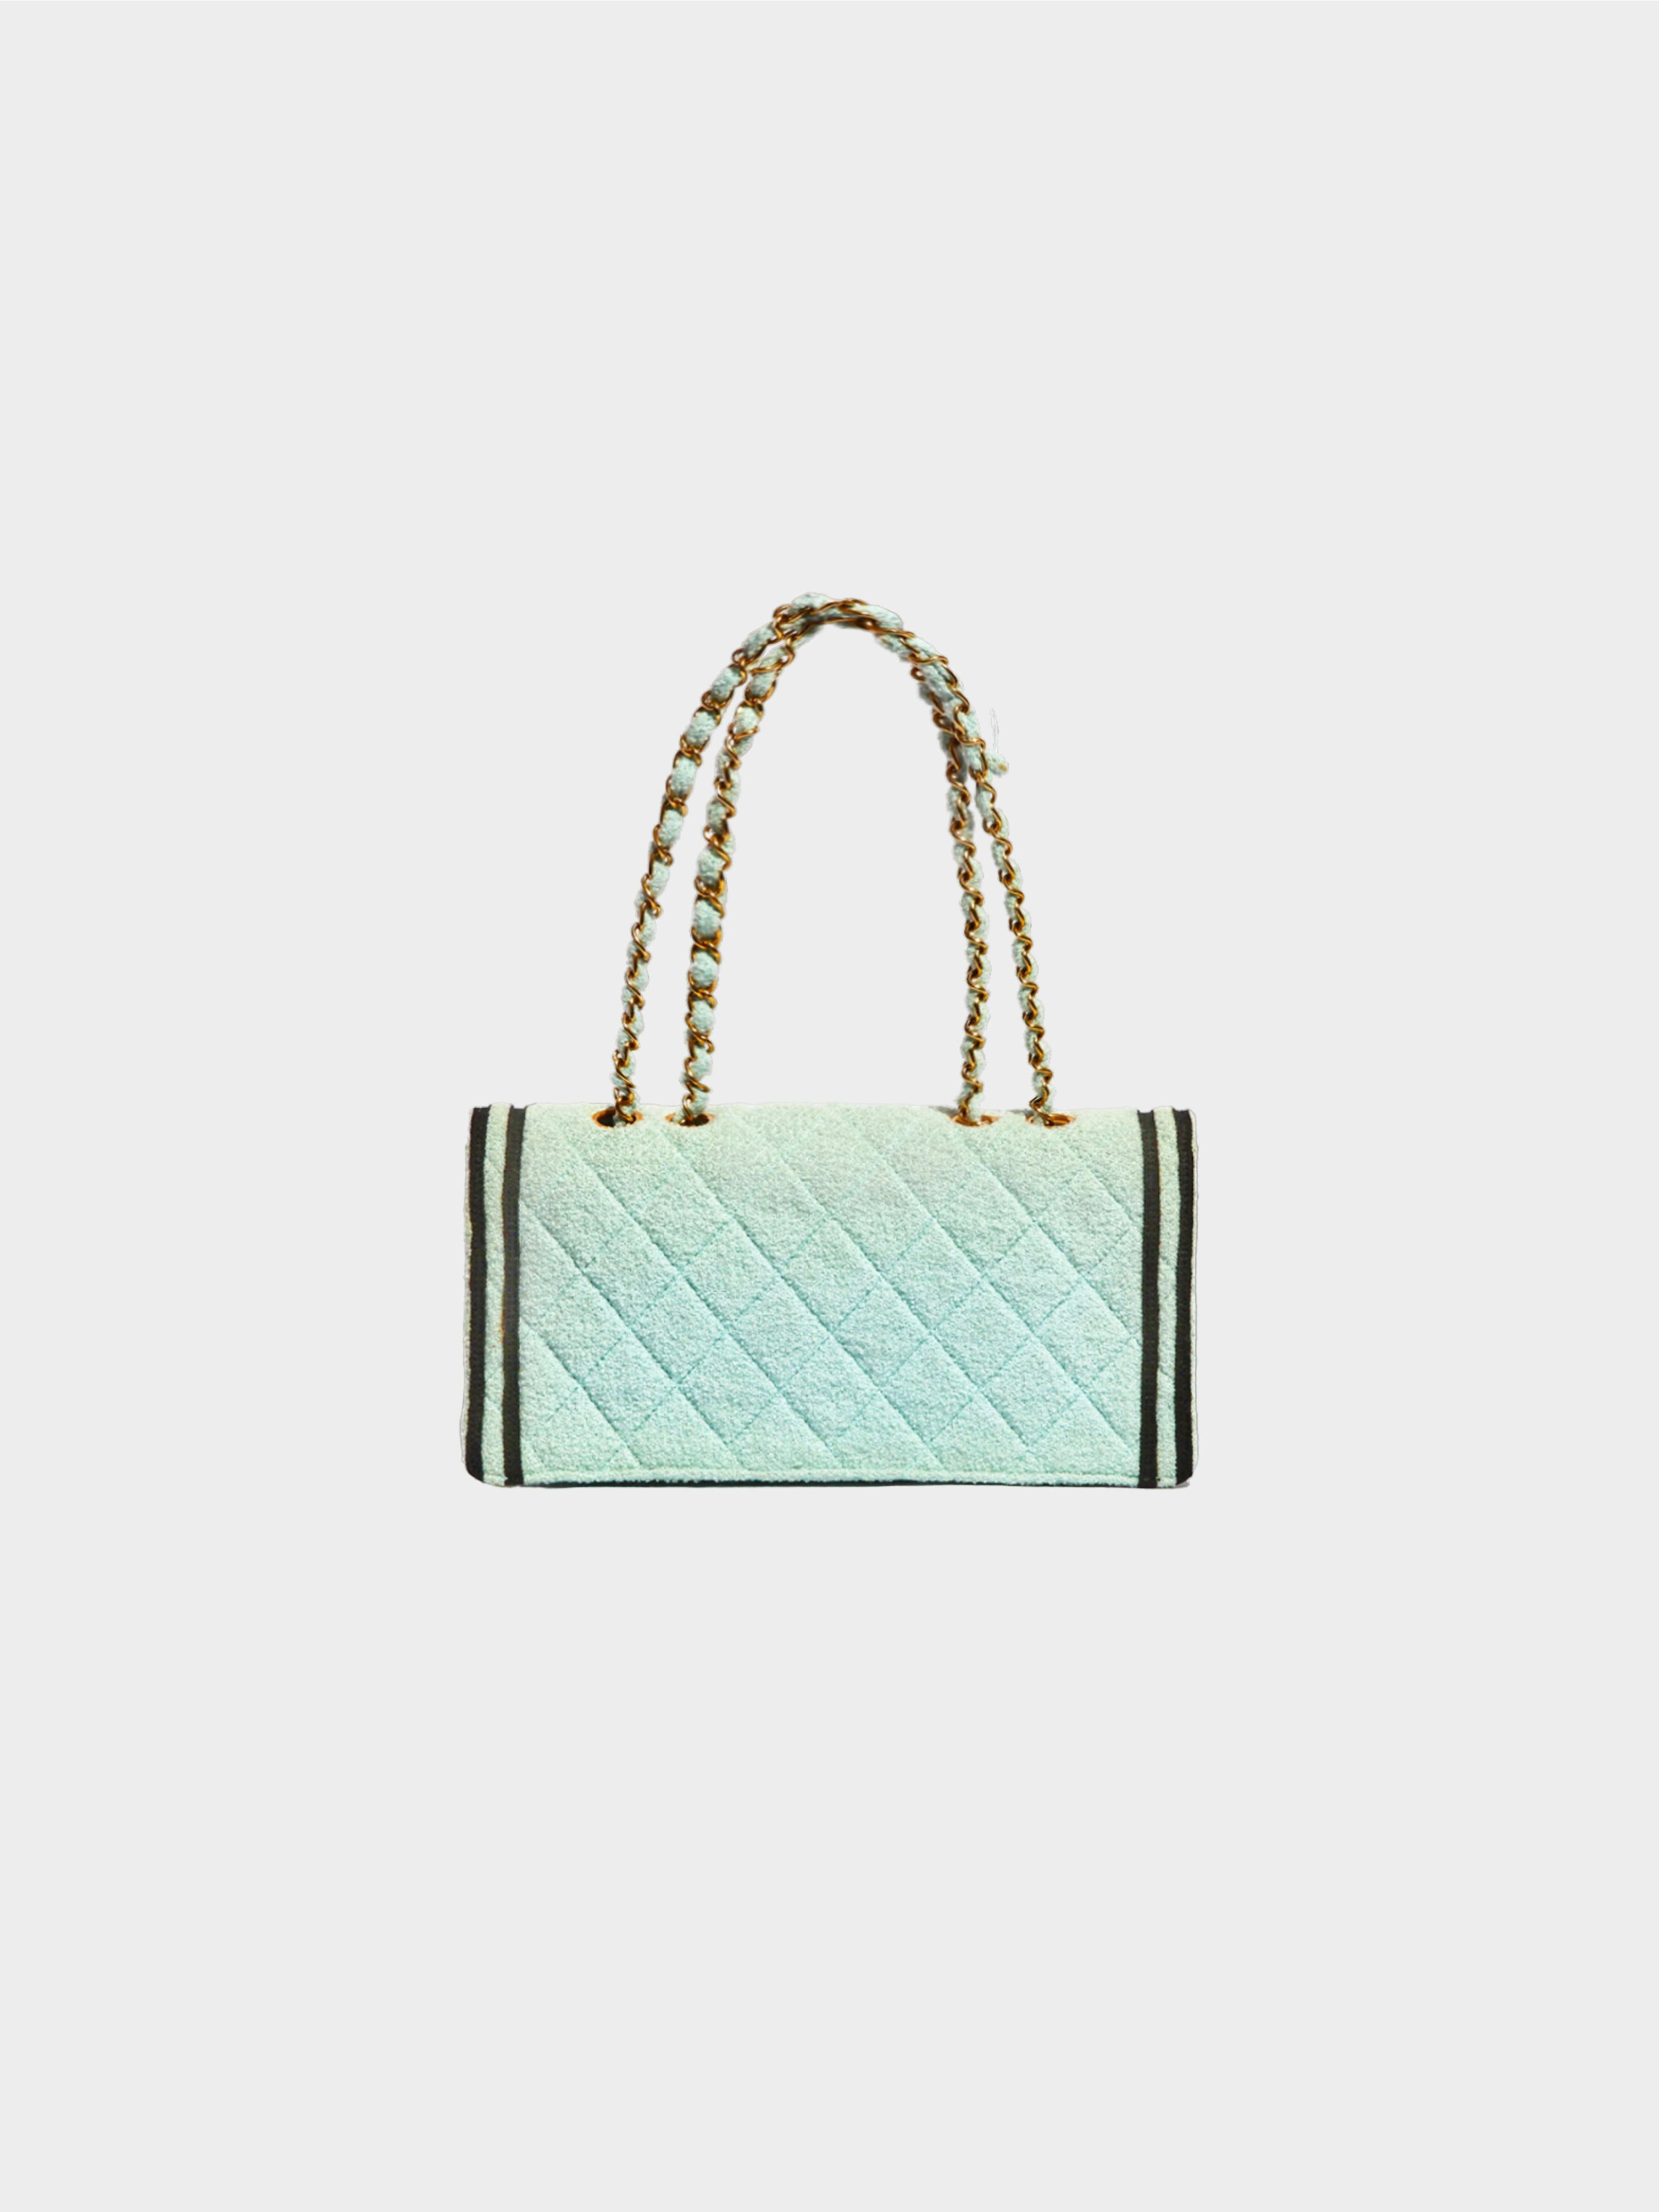 Chanel FW 1994-1995 Rare Pale Turquoise Wool Flap Bag